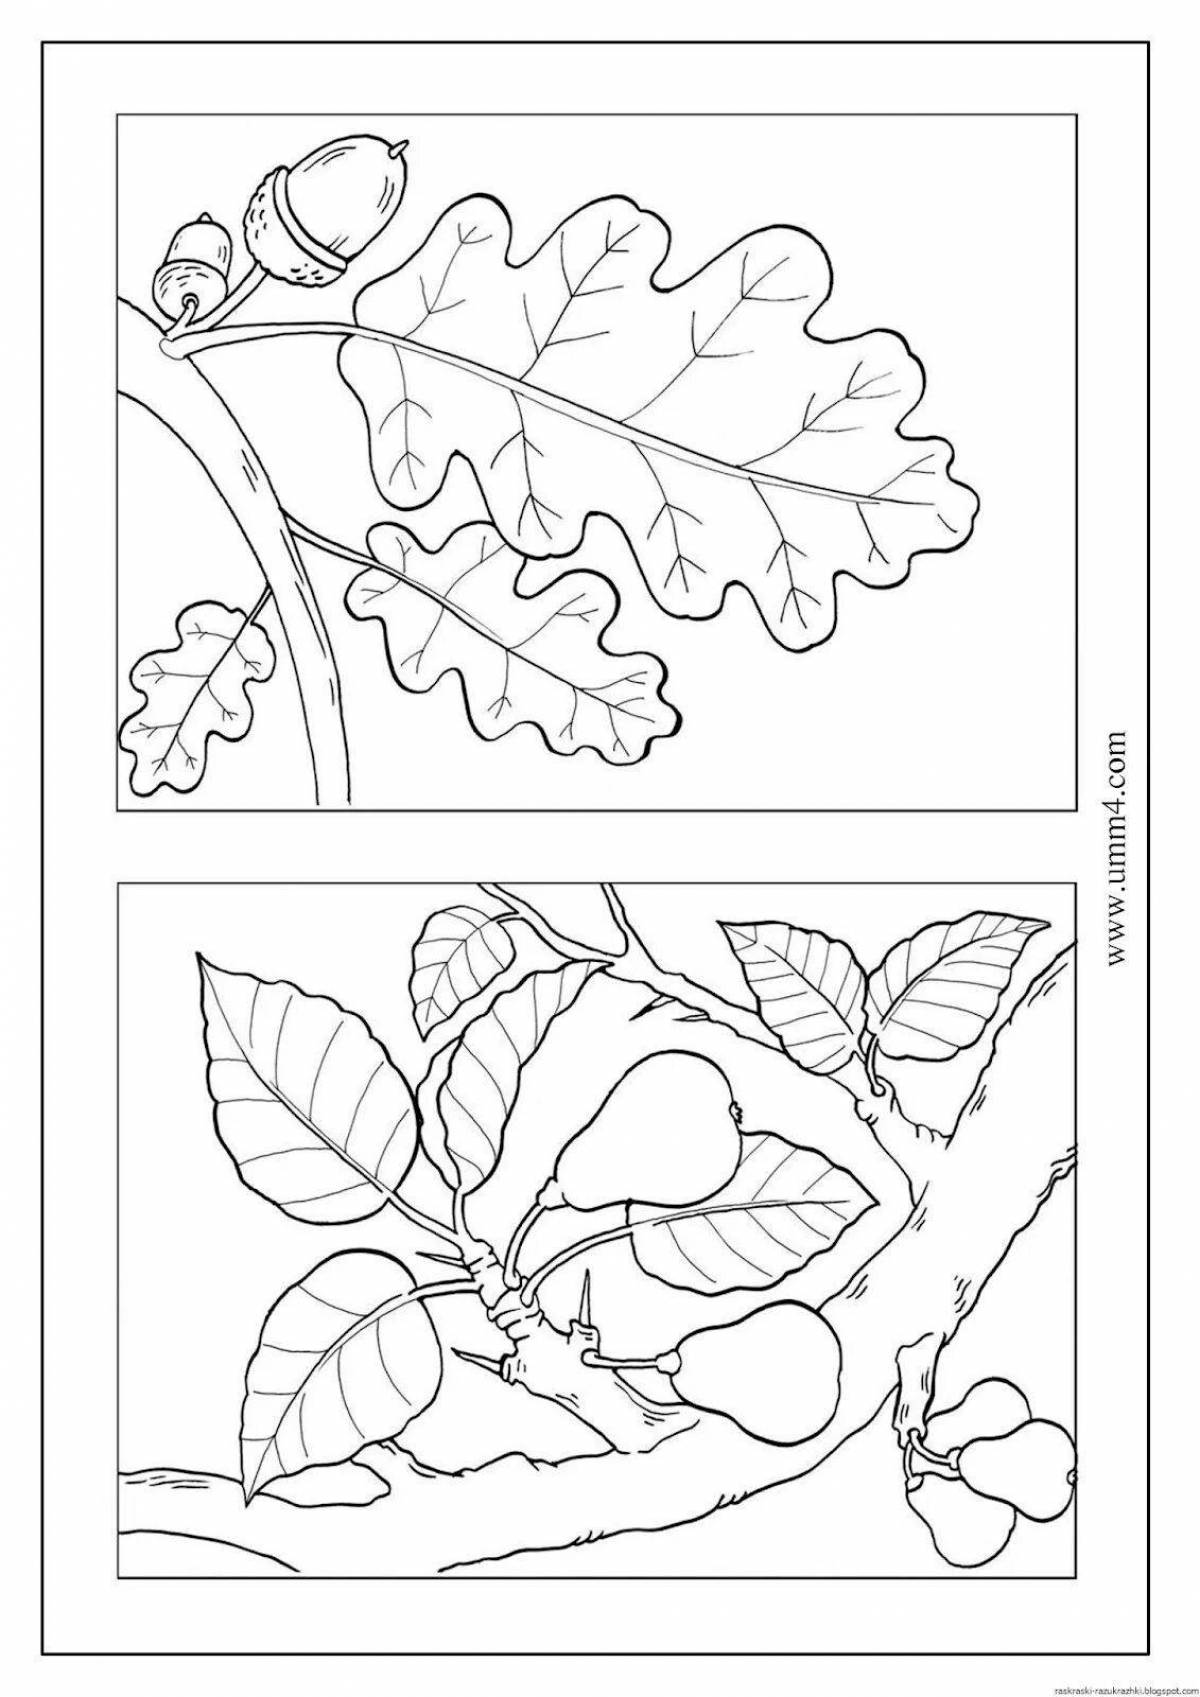 Glitter coloring page two on one sheet for garden